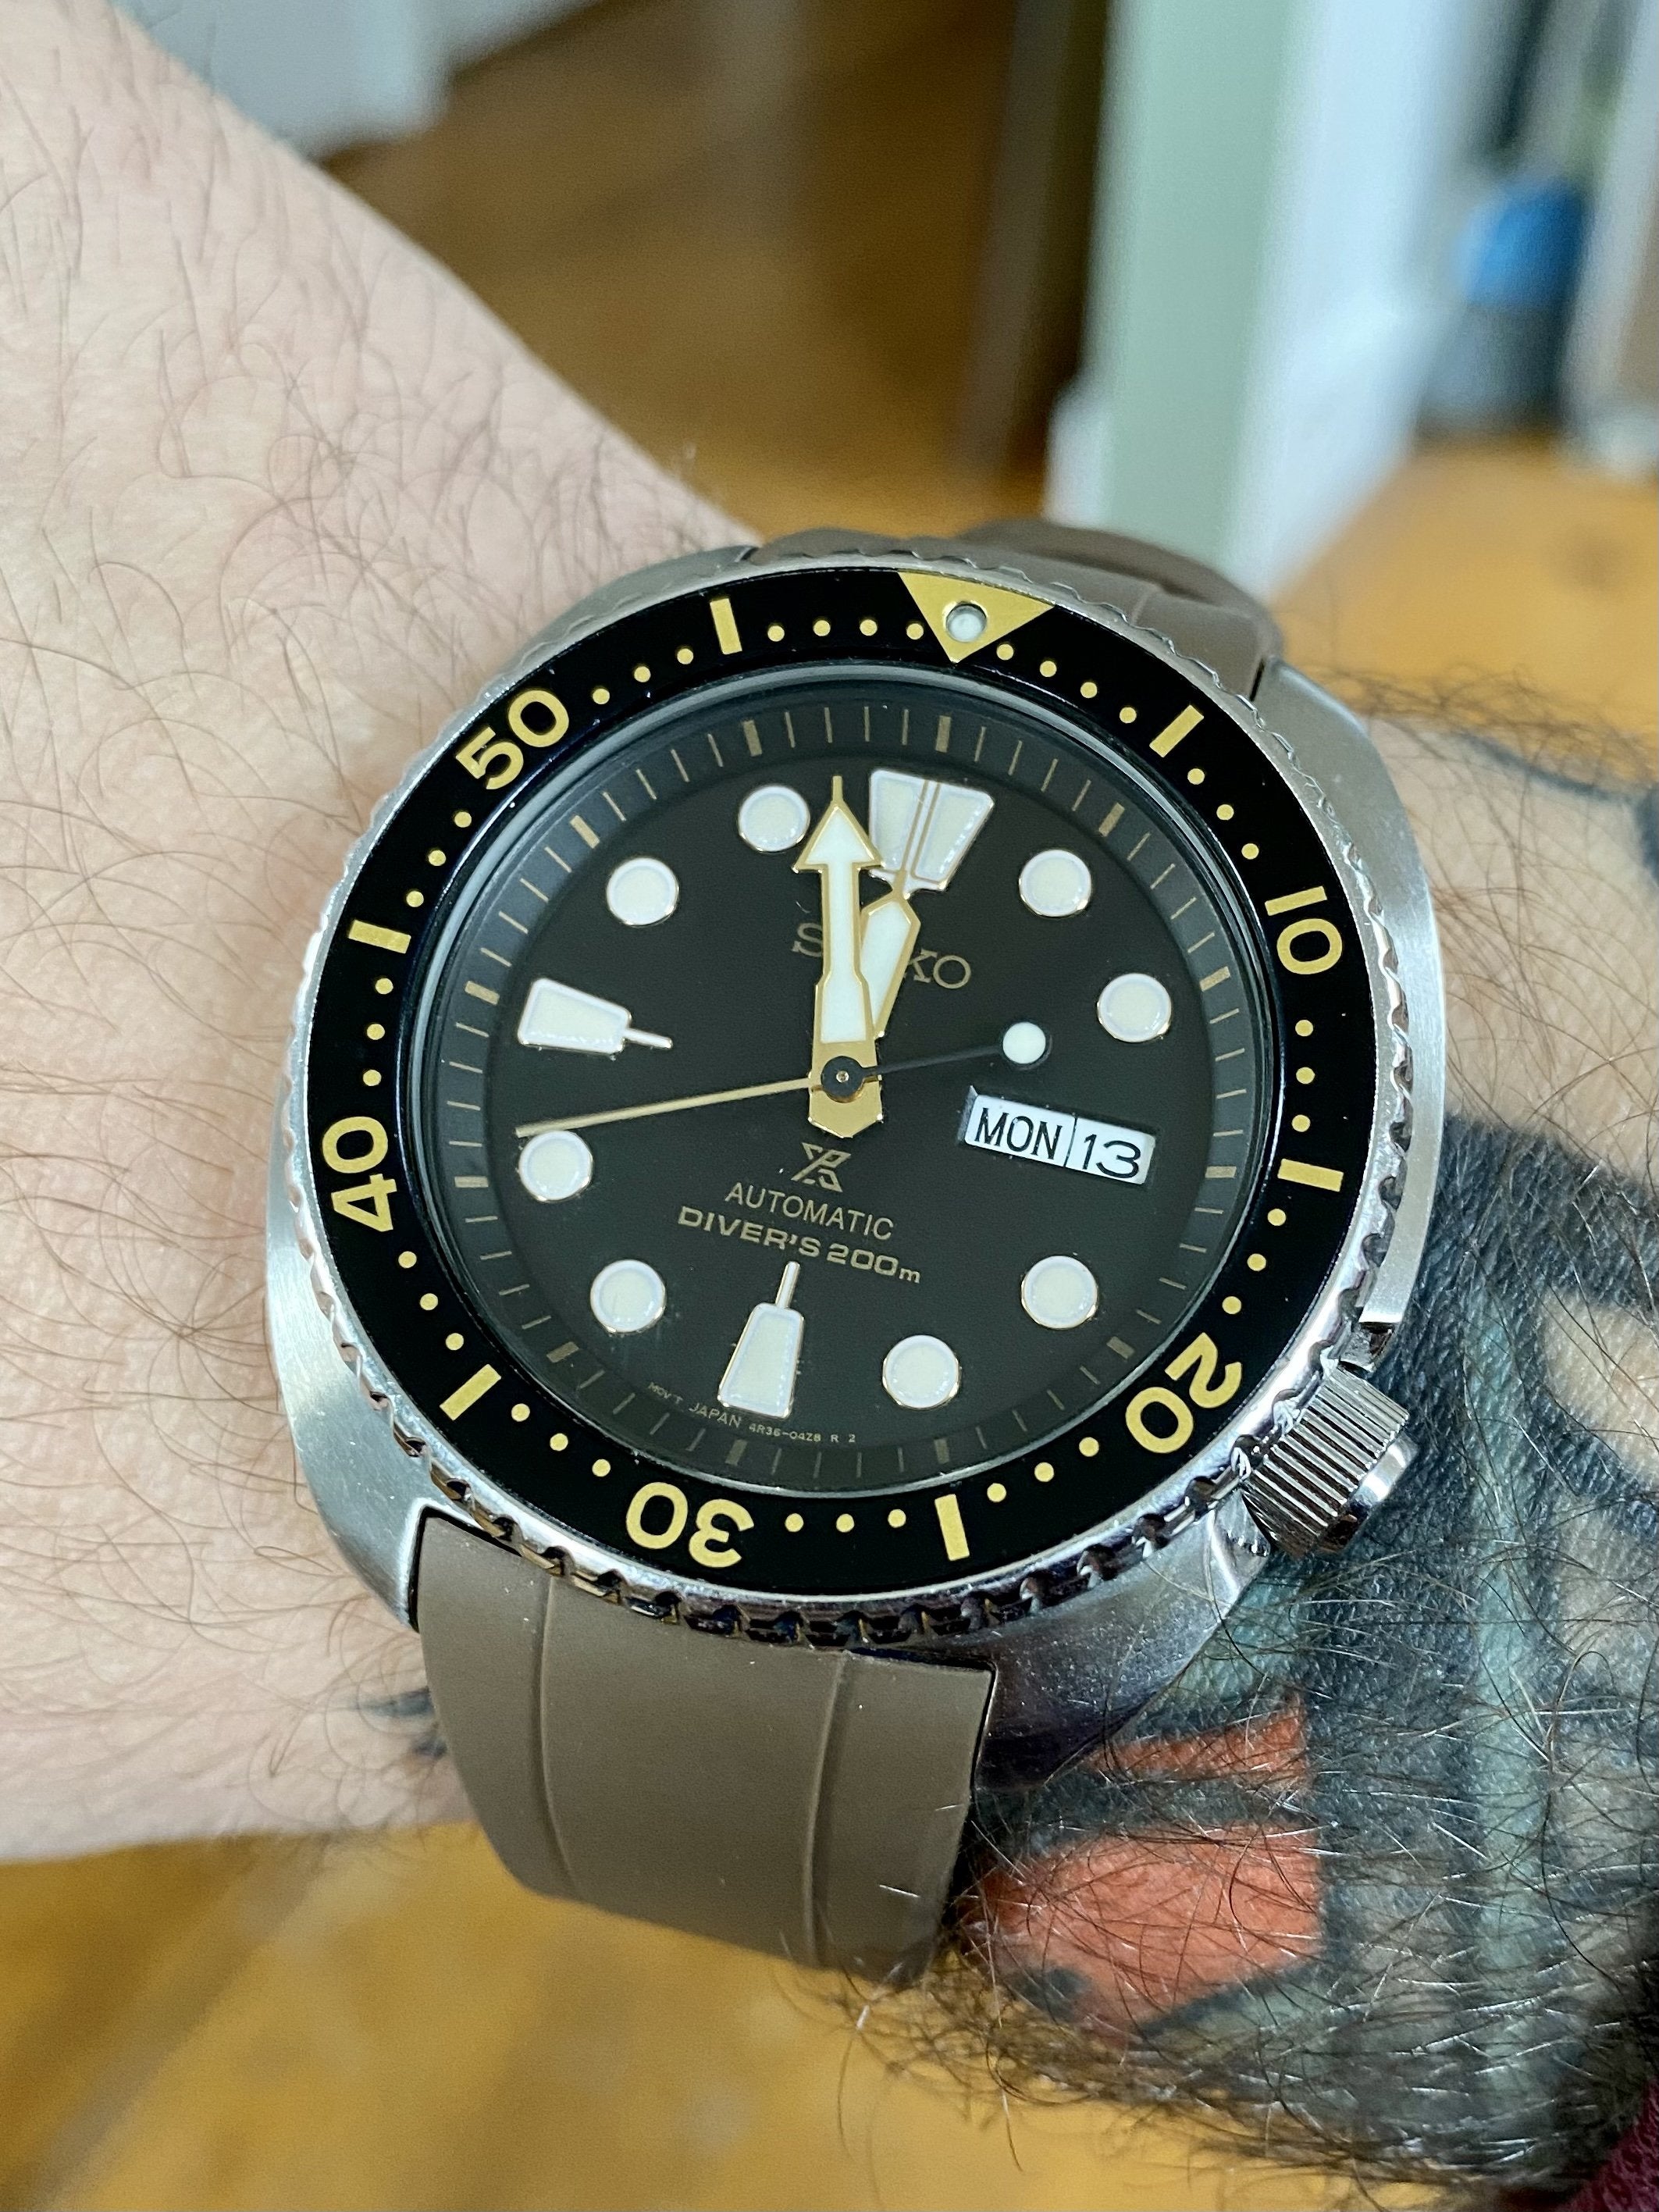 Hardlex Crystal - is it sufficient? | WatchUSeek Watch Forums